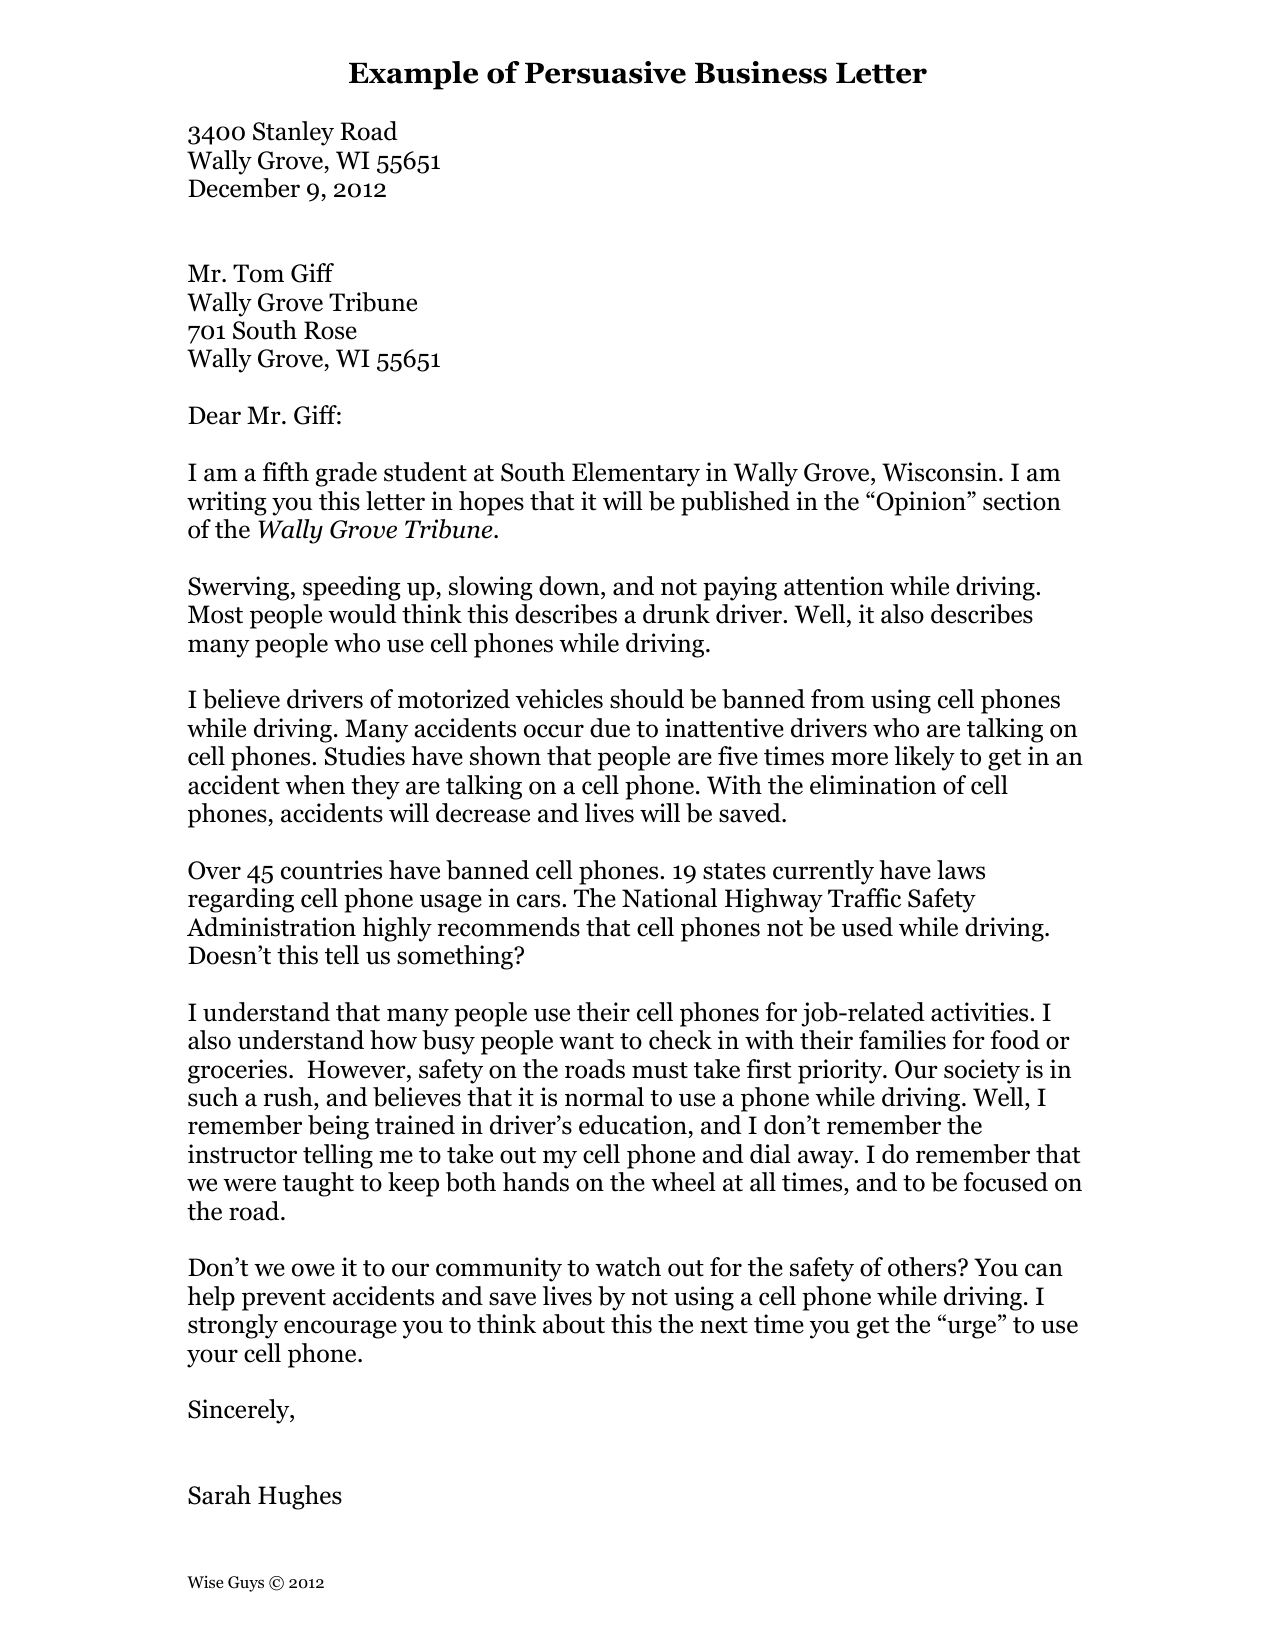 Persuasive Business Letter for Students